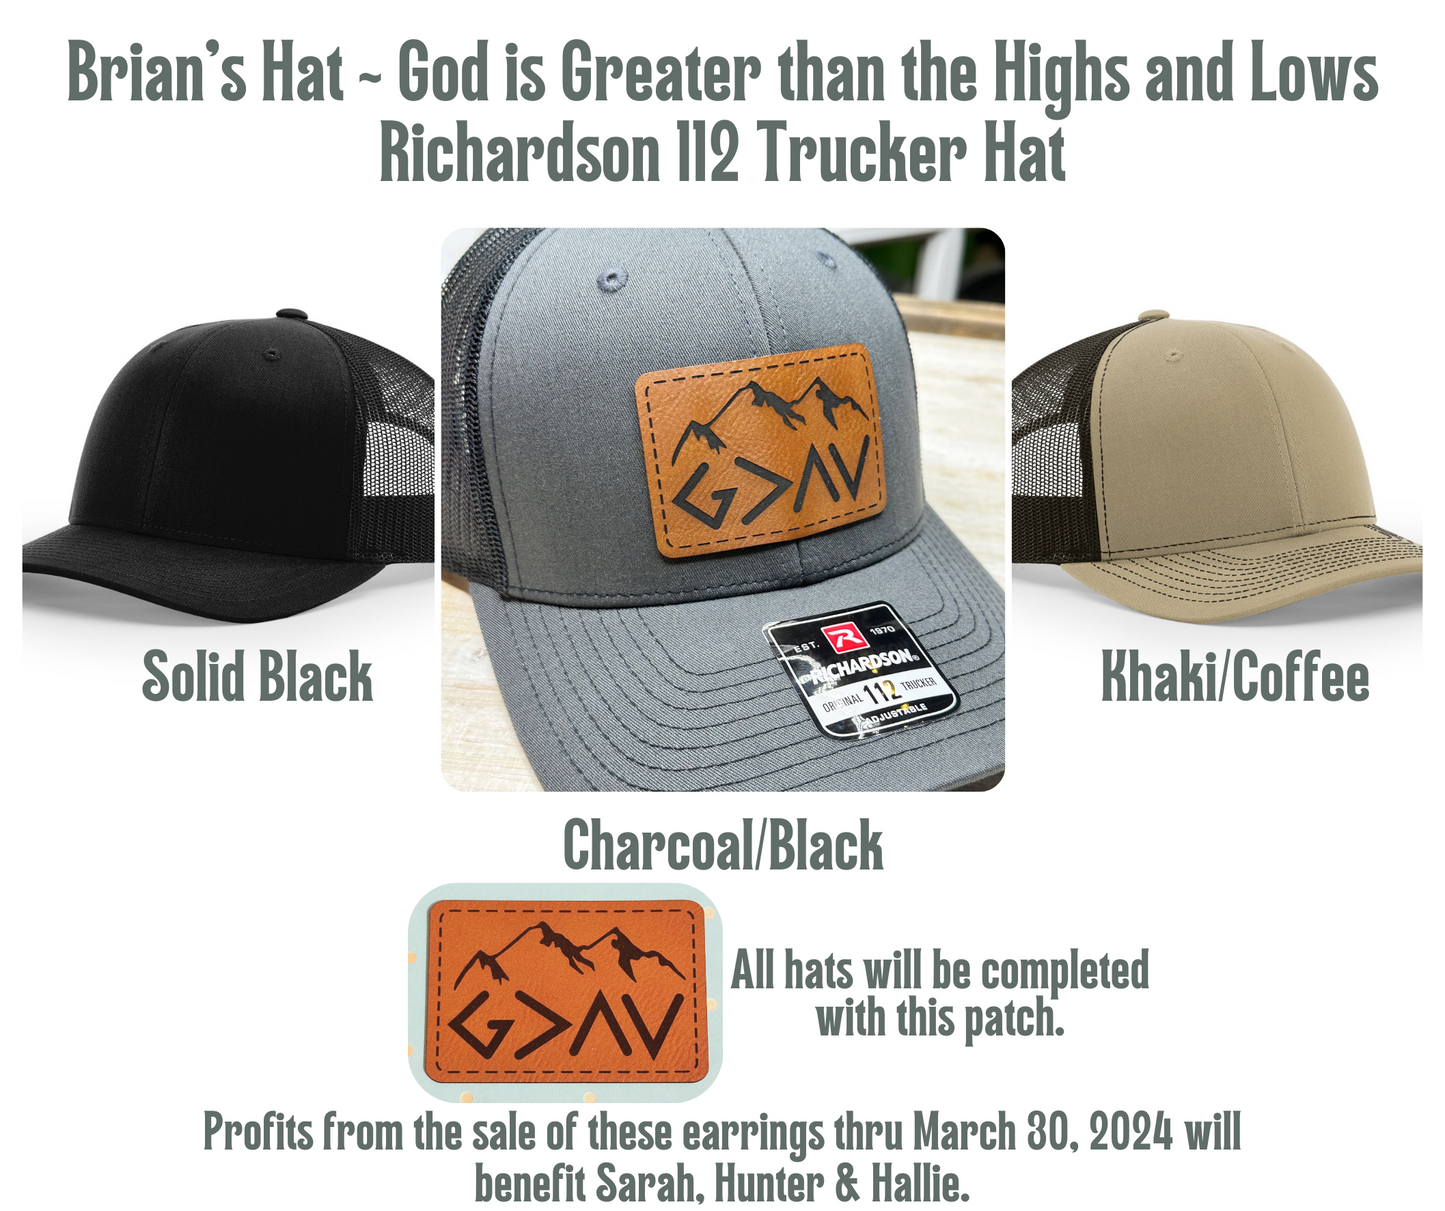 "Brian's Hat" God is greater than the highs and lows Richardson 112